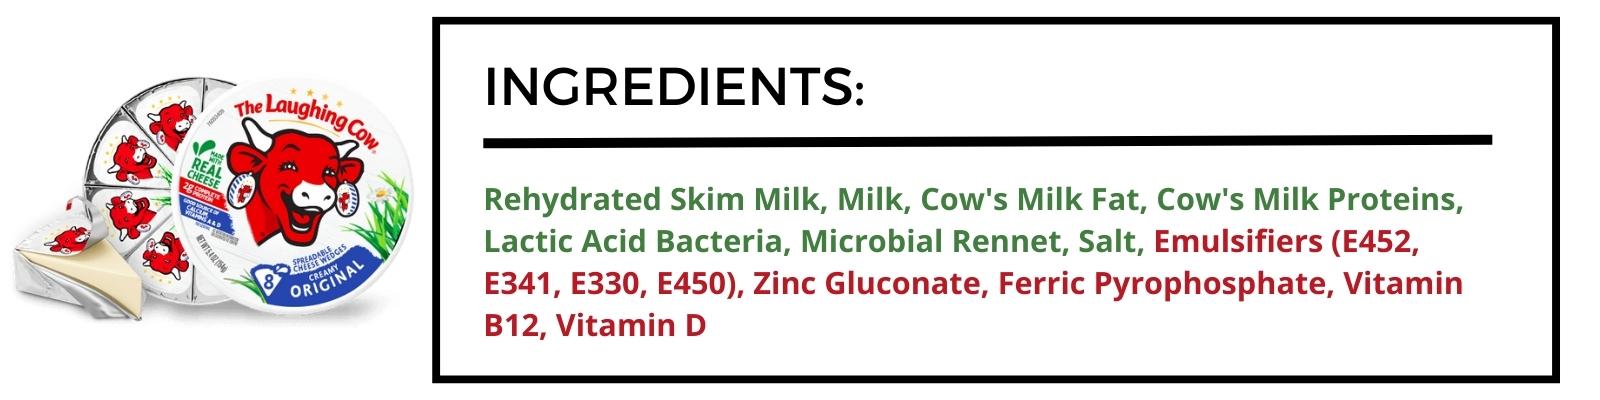 The Laughing Cow Ingredients